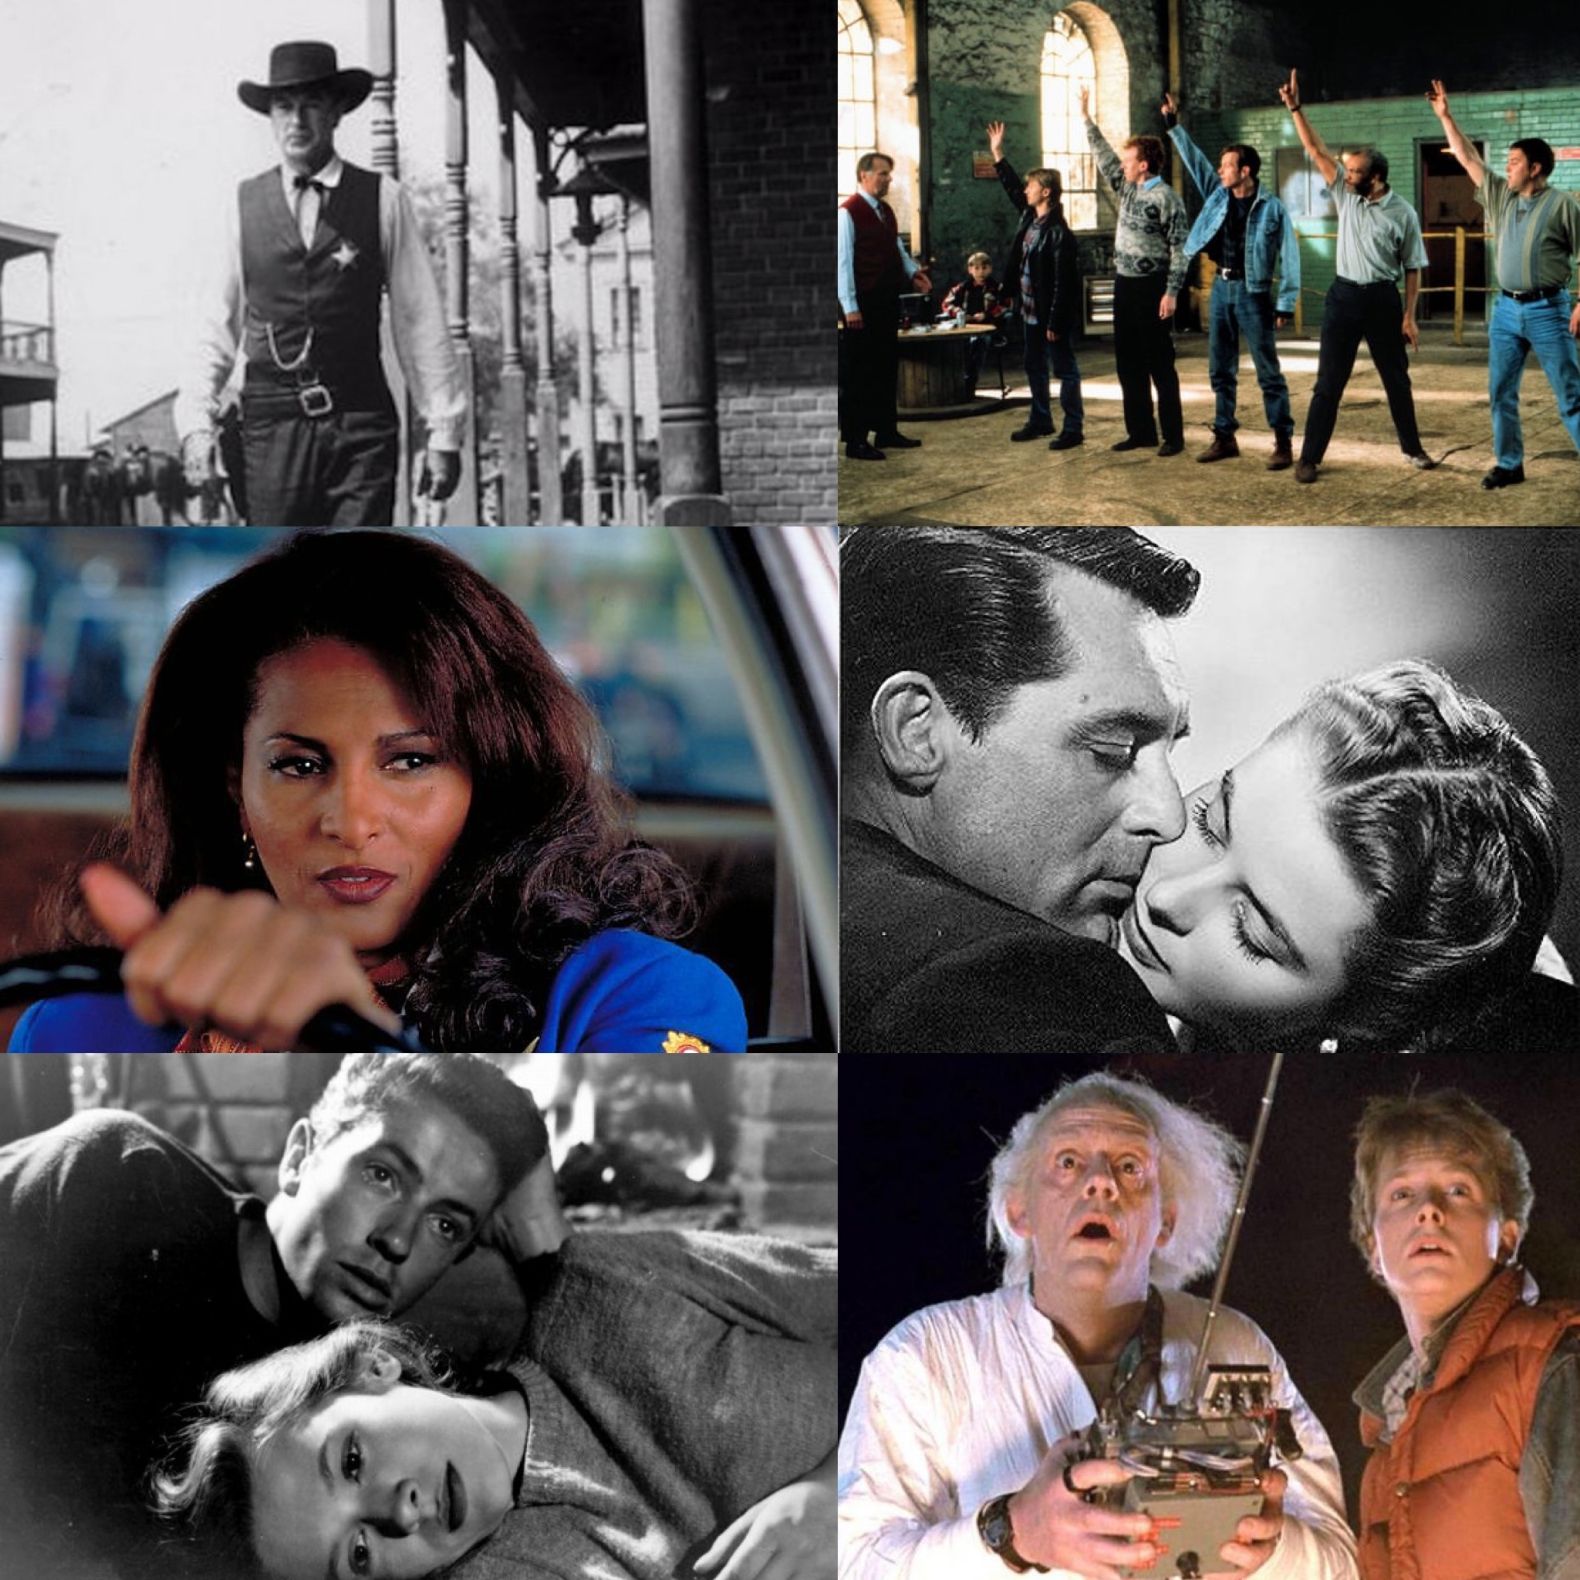 Duke Box #6: Our Guide to the Best Films on TV